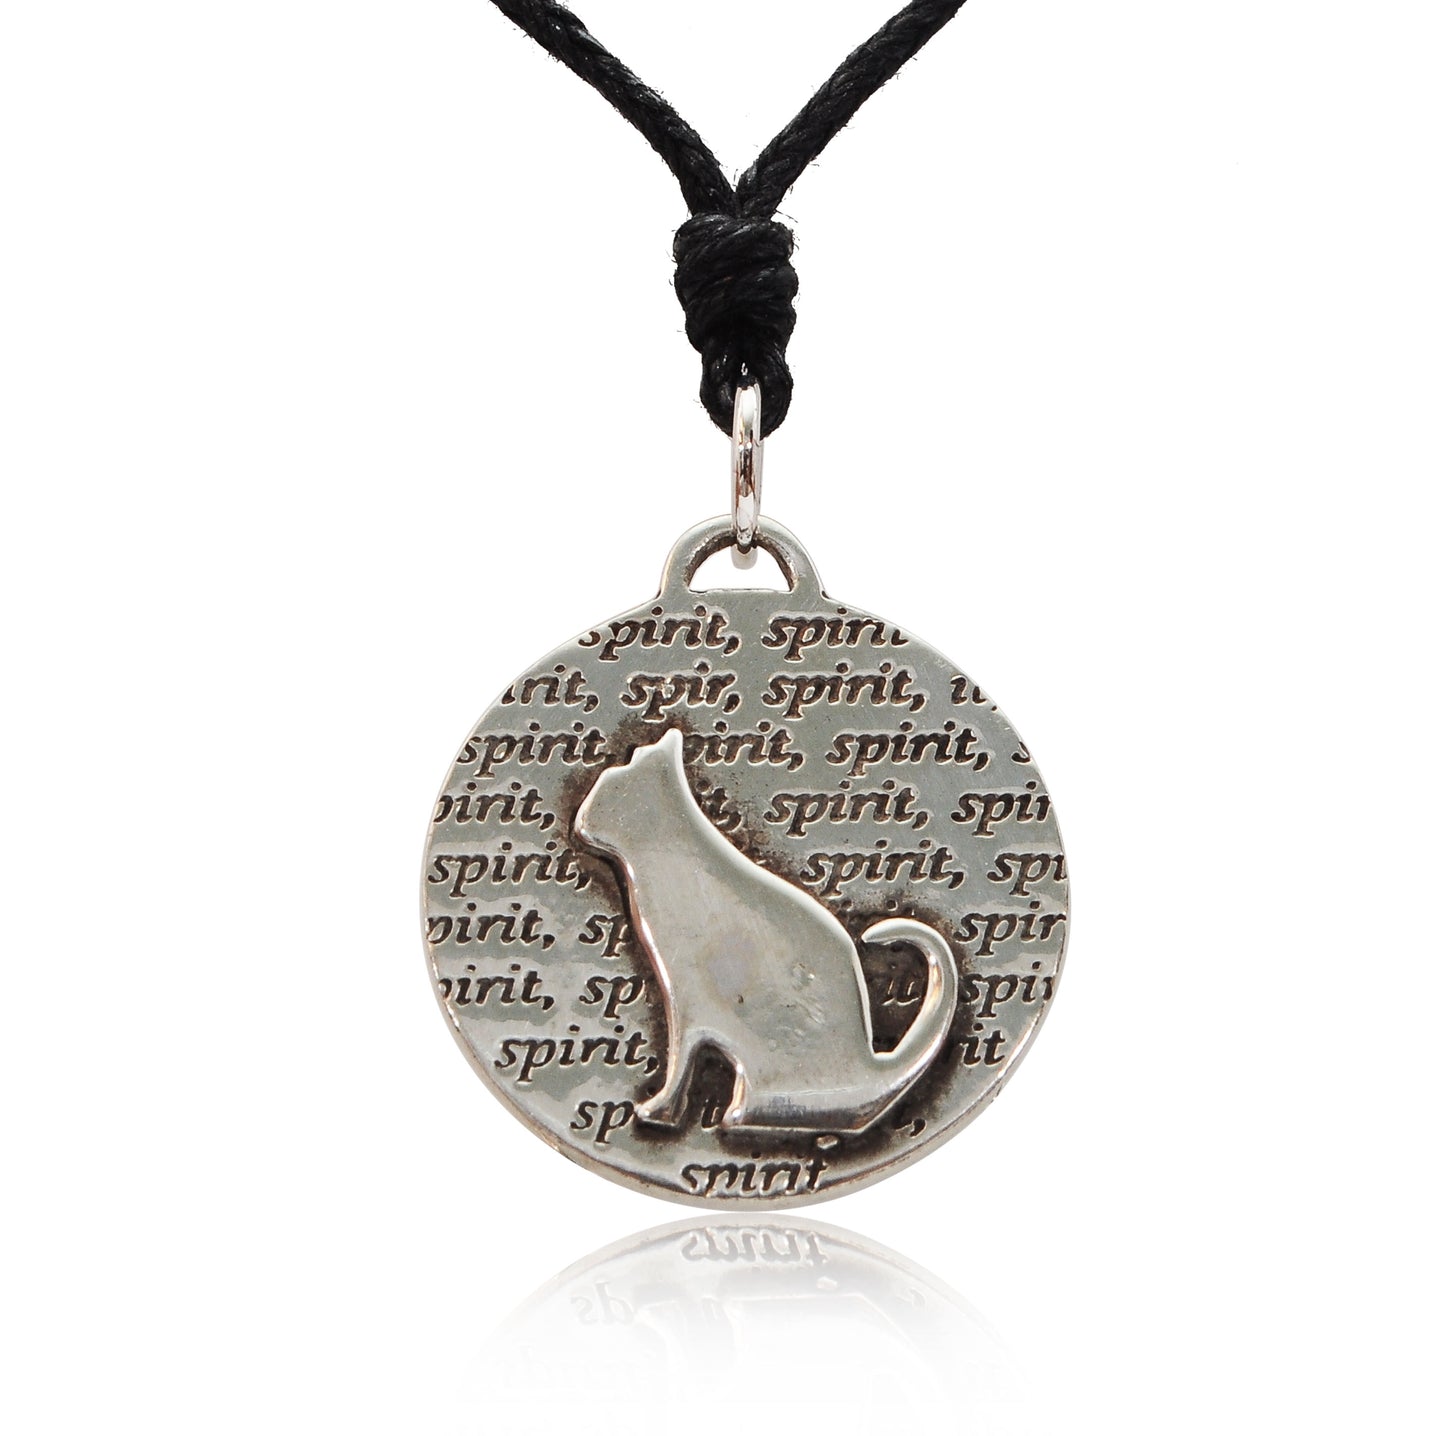 New Spirit Cat Kitten Silver Pewter Charm Necklace Pendant Jewelry